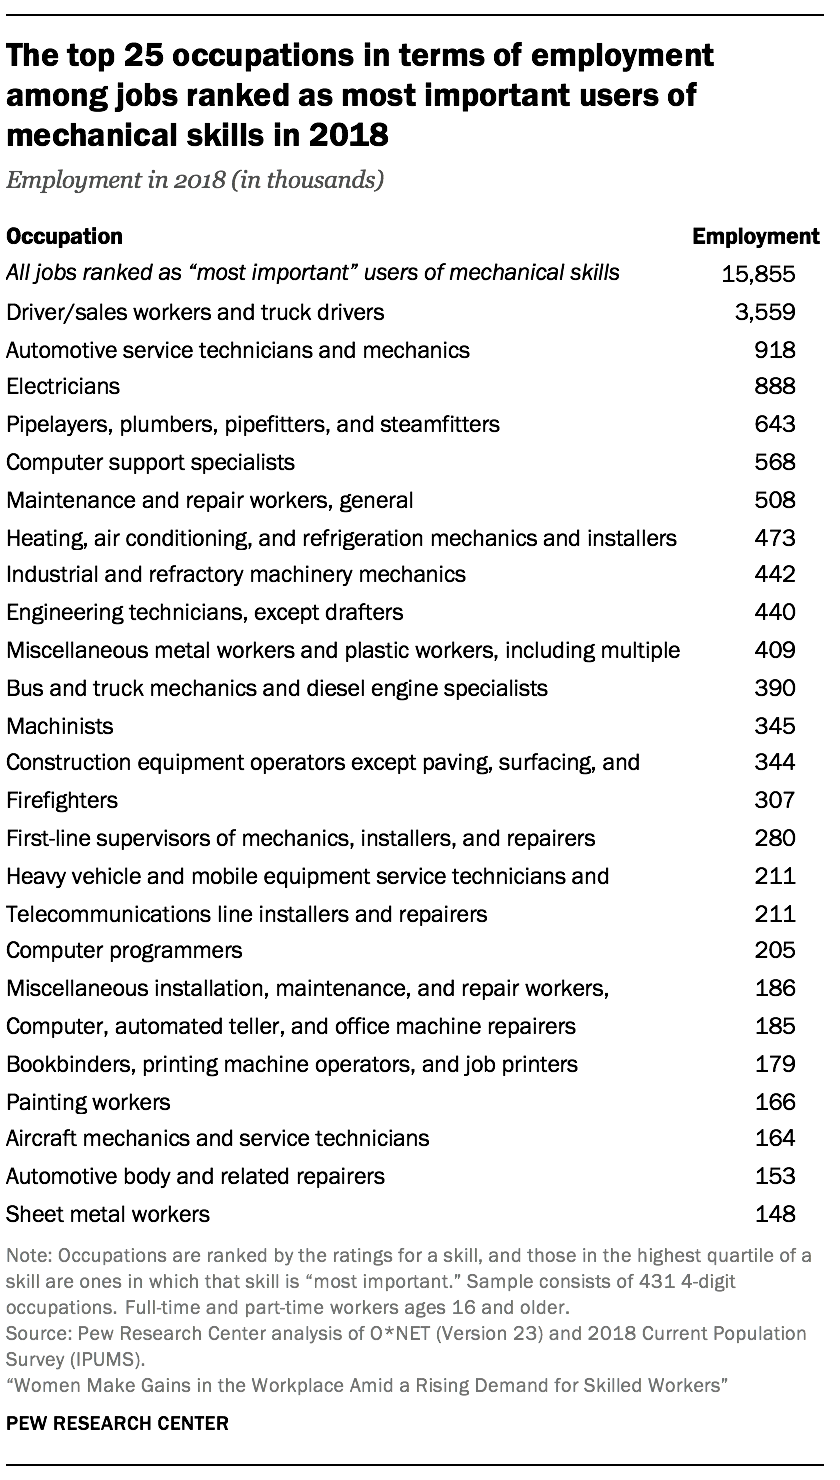 The top 25 occupations in terms of employment among jobs ranked as most important users of mechanical skills in 2018